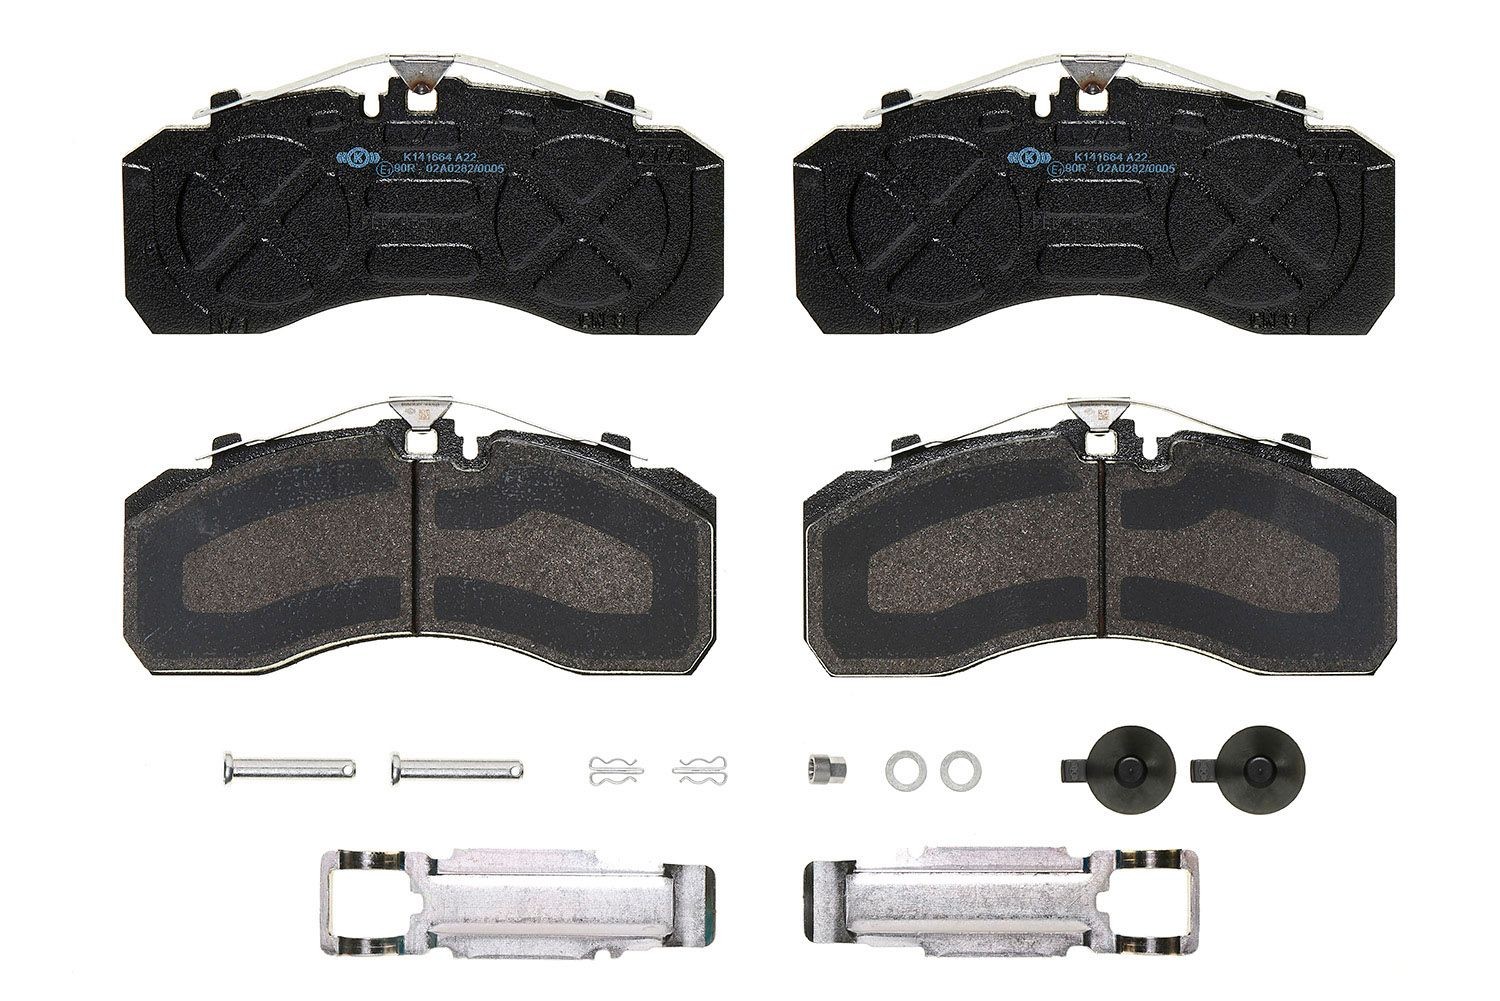 BREMBO P B4 501S Brake pad set prepared for wear indicator, with accessories